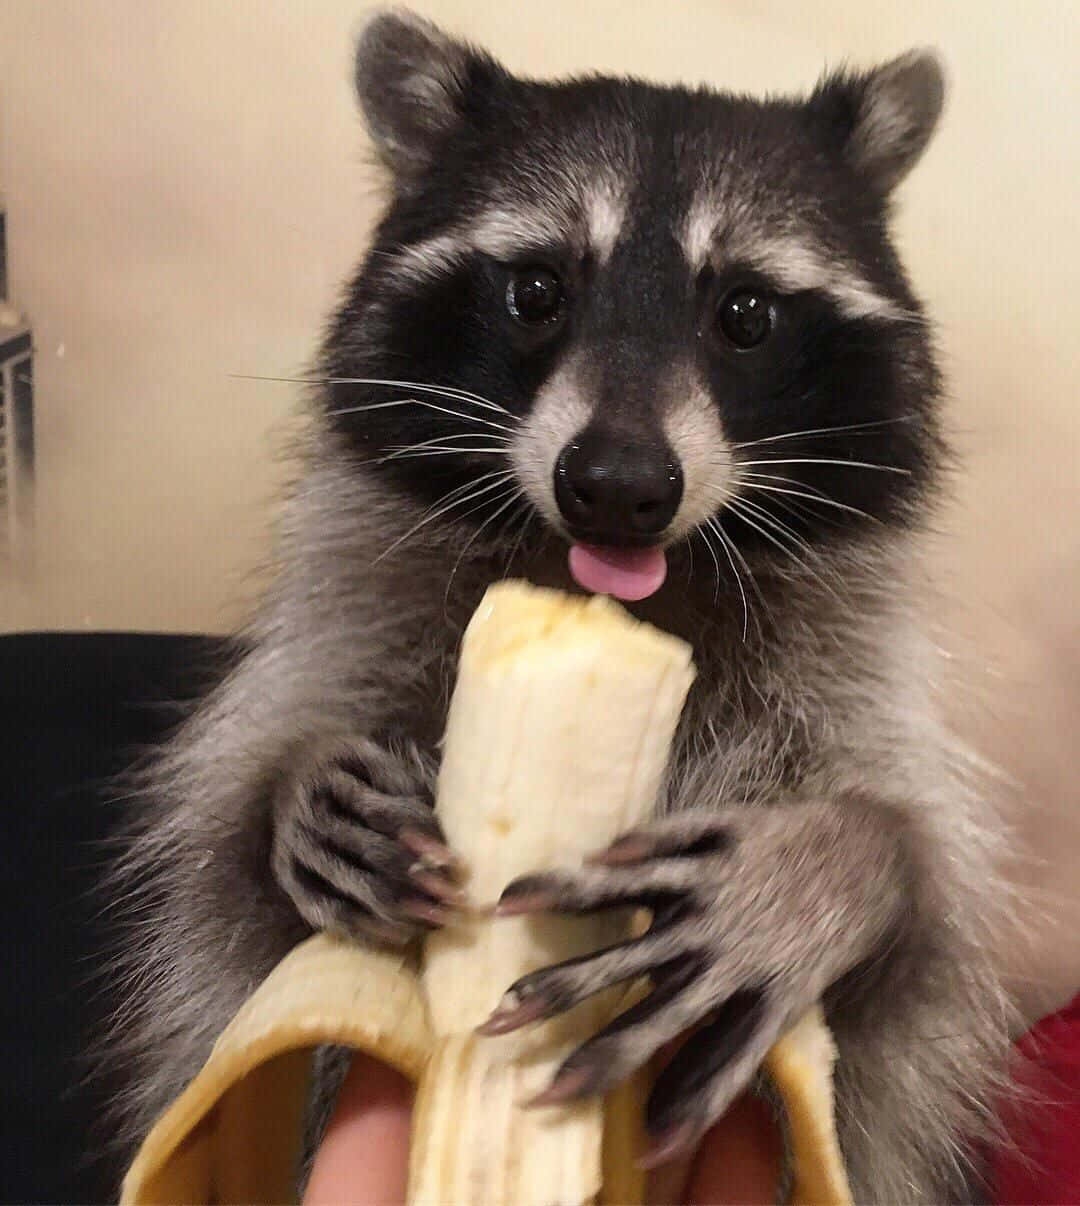 Funny Raccoon Cute Eating Banana Tongue Out Picture